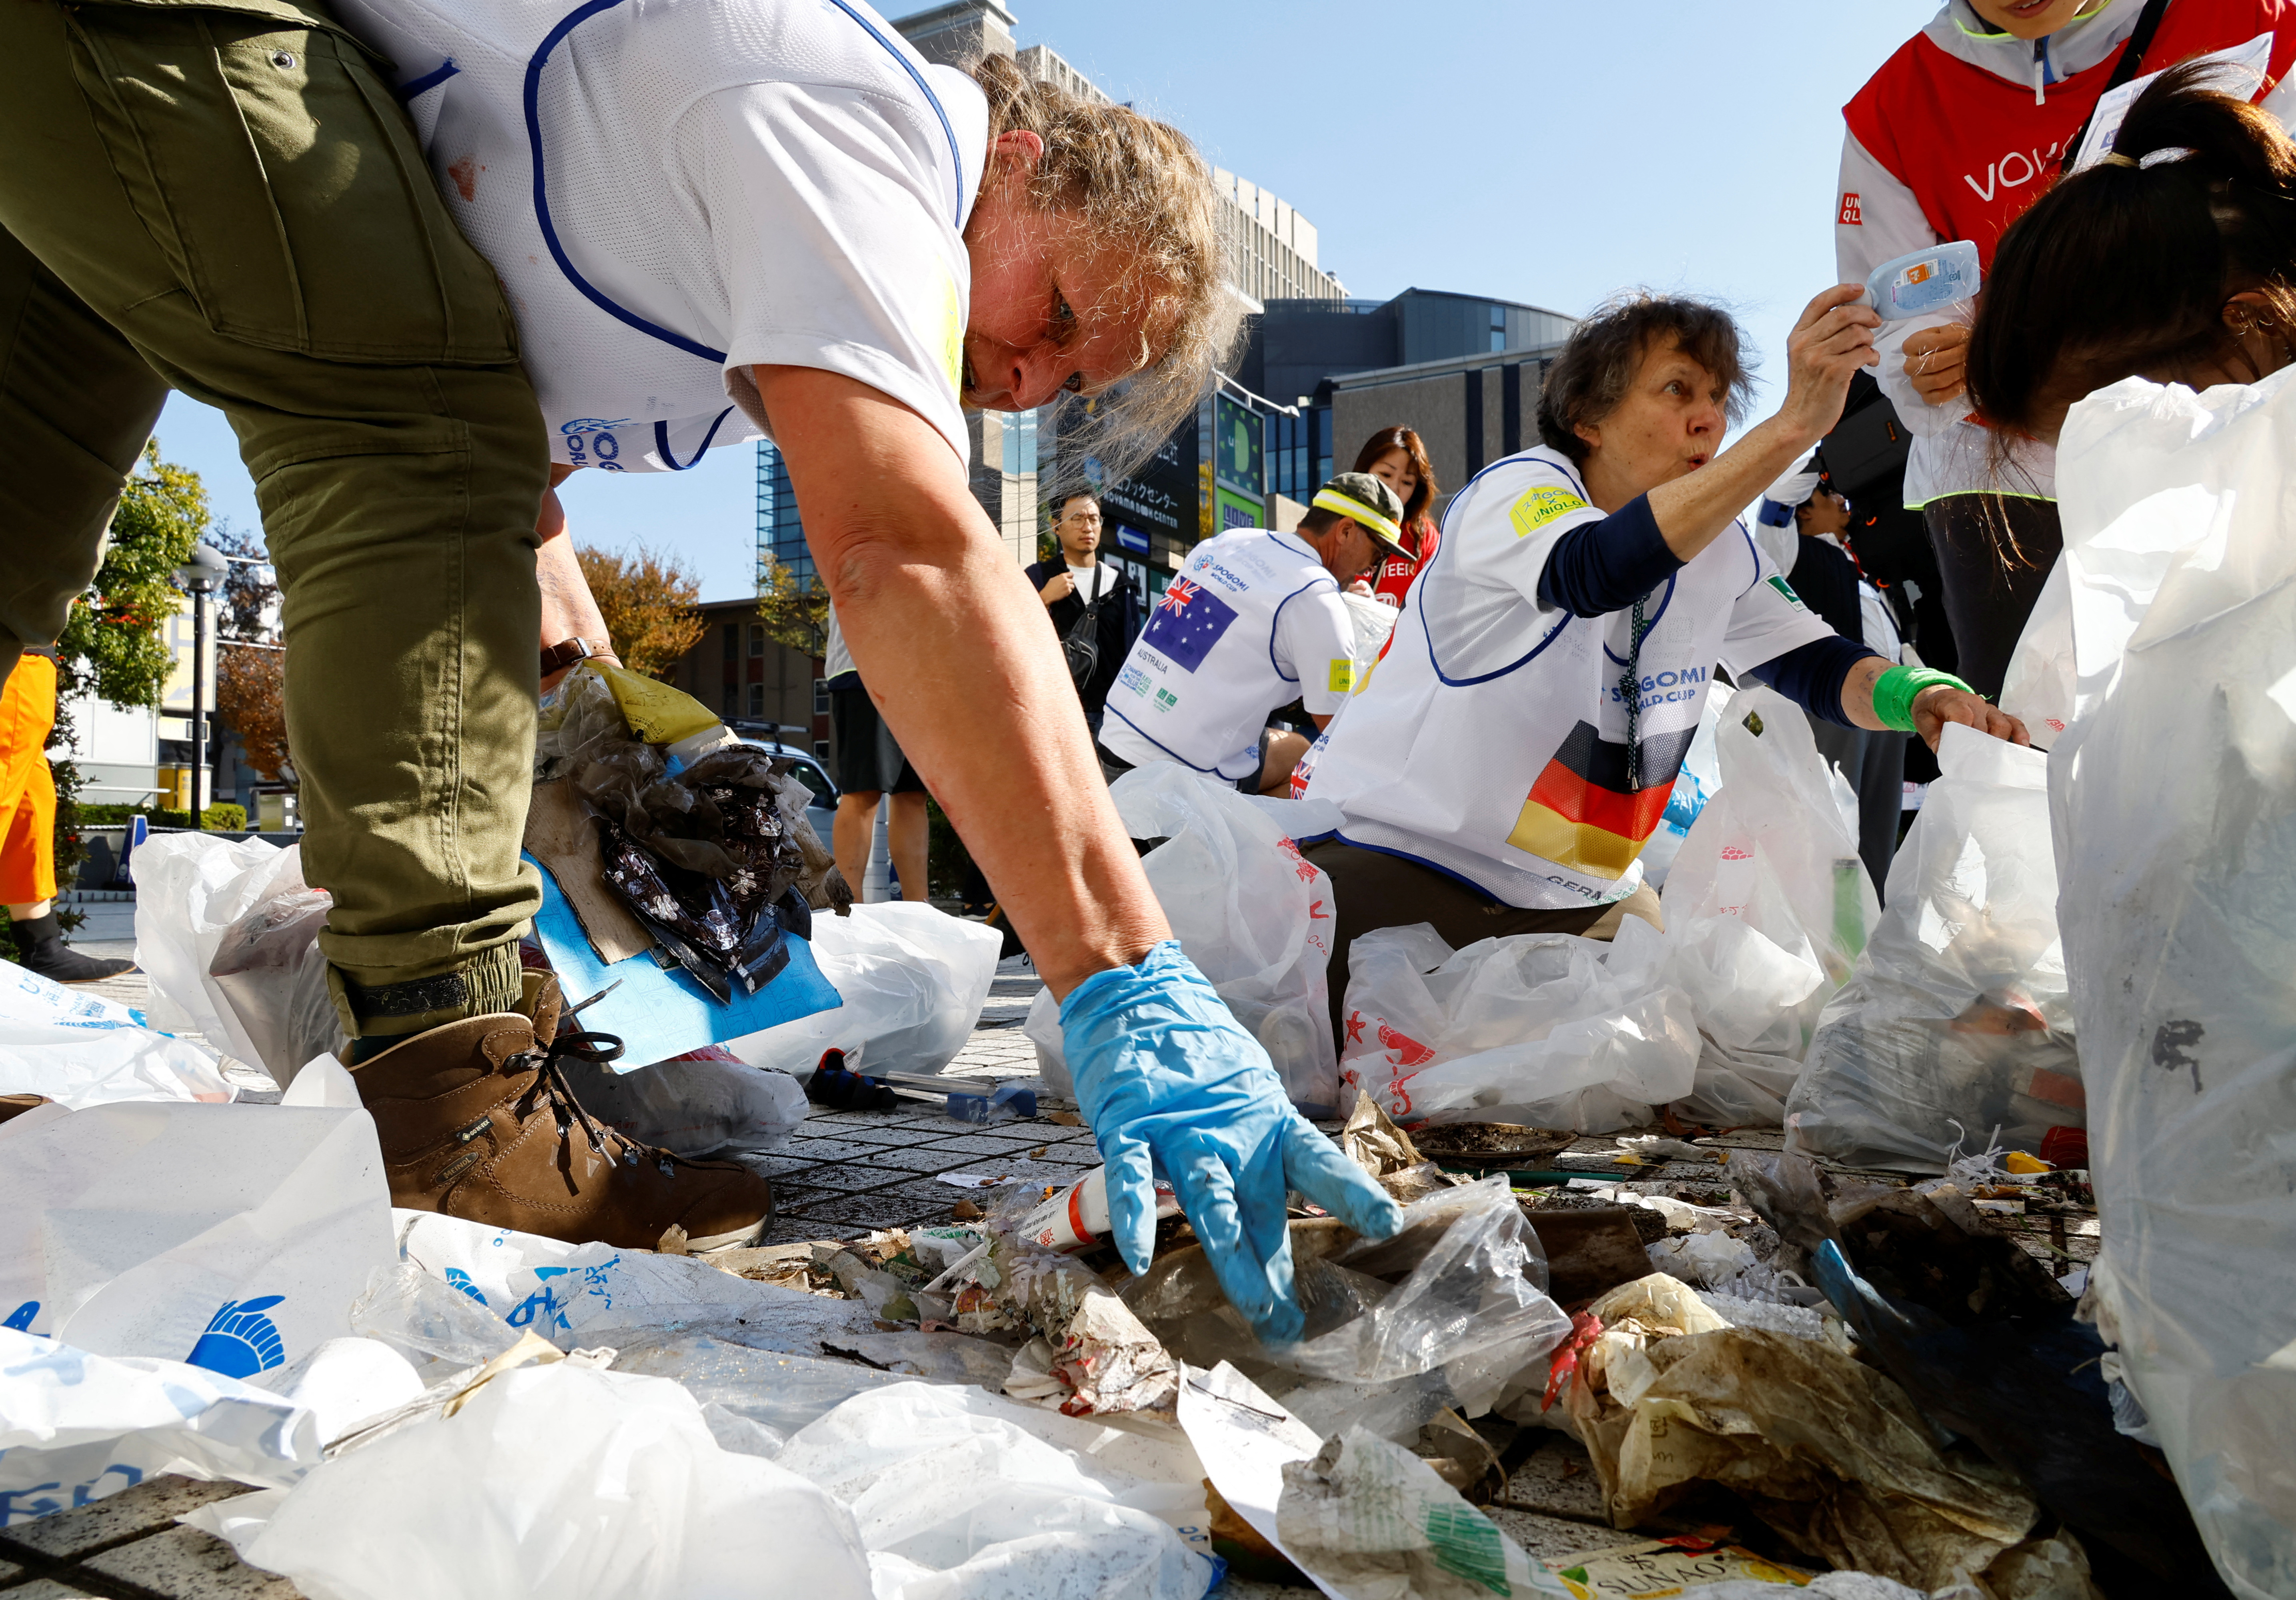 Britain wins litter-picking World Cup with load of rubbish | Reuters